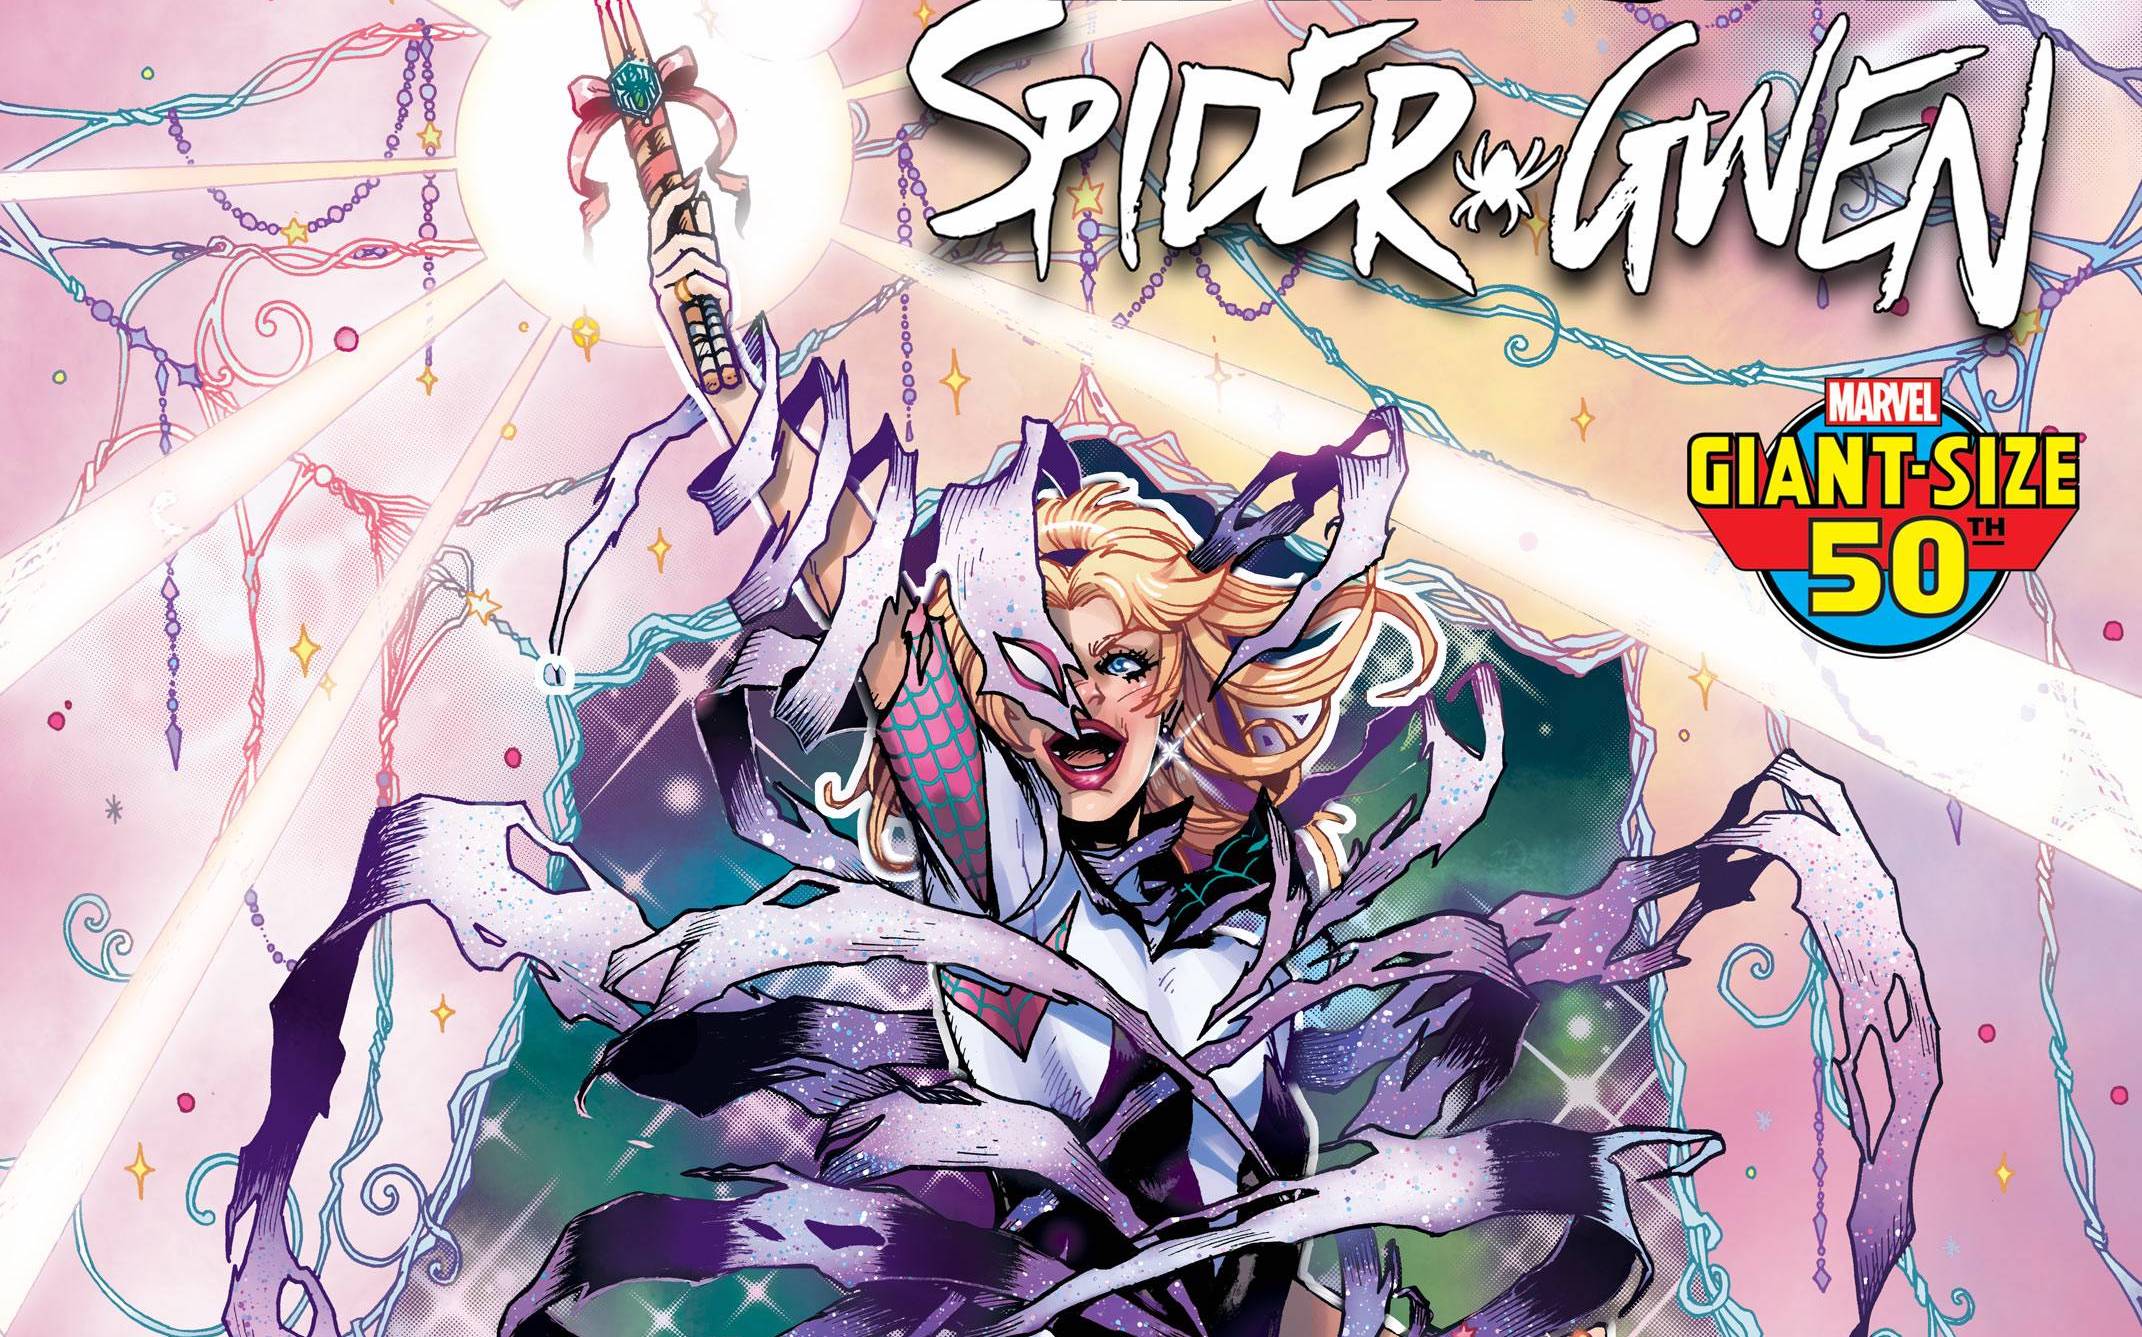 Melissa Flores on the impact of Spider-Gwen, new villains, and writing 'Giant-Size Spider-Gwen'